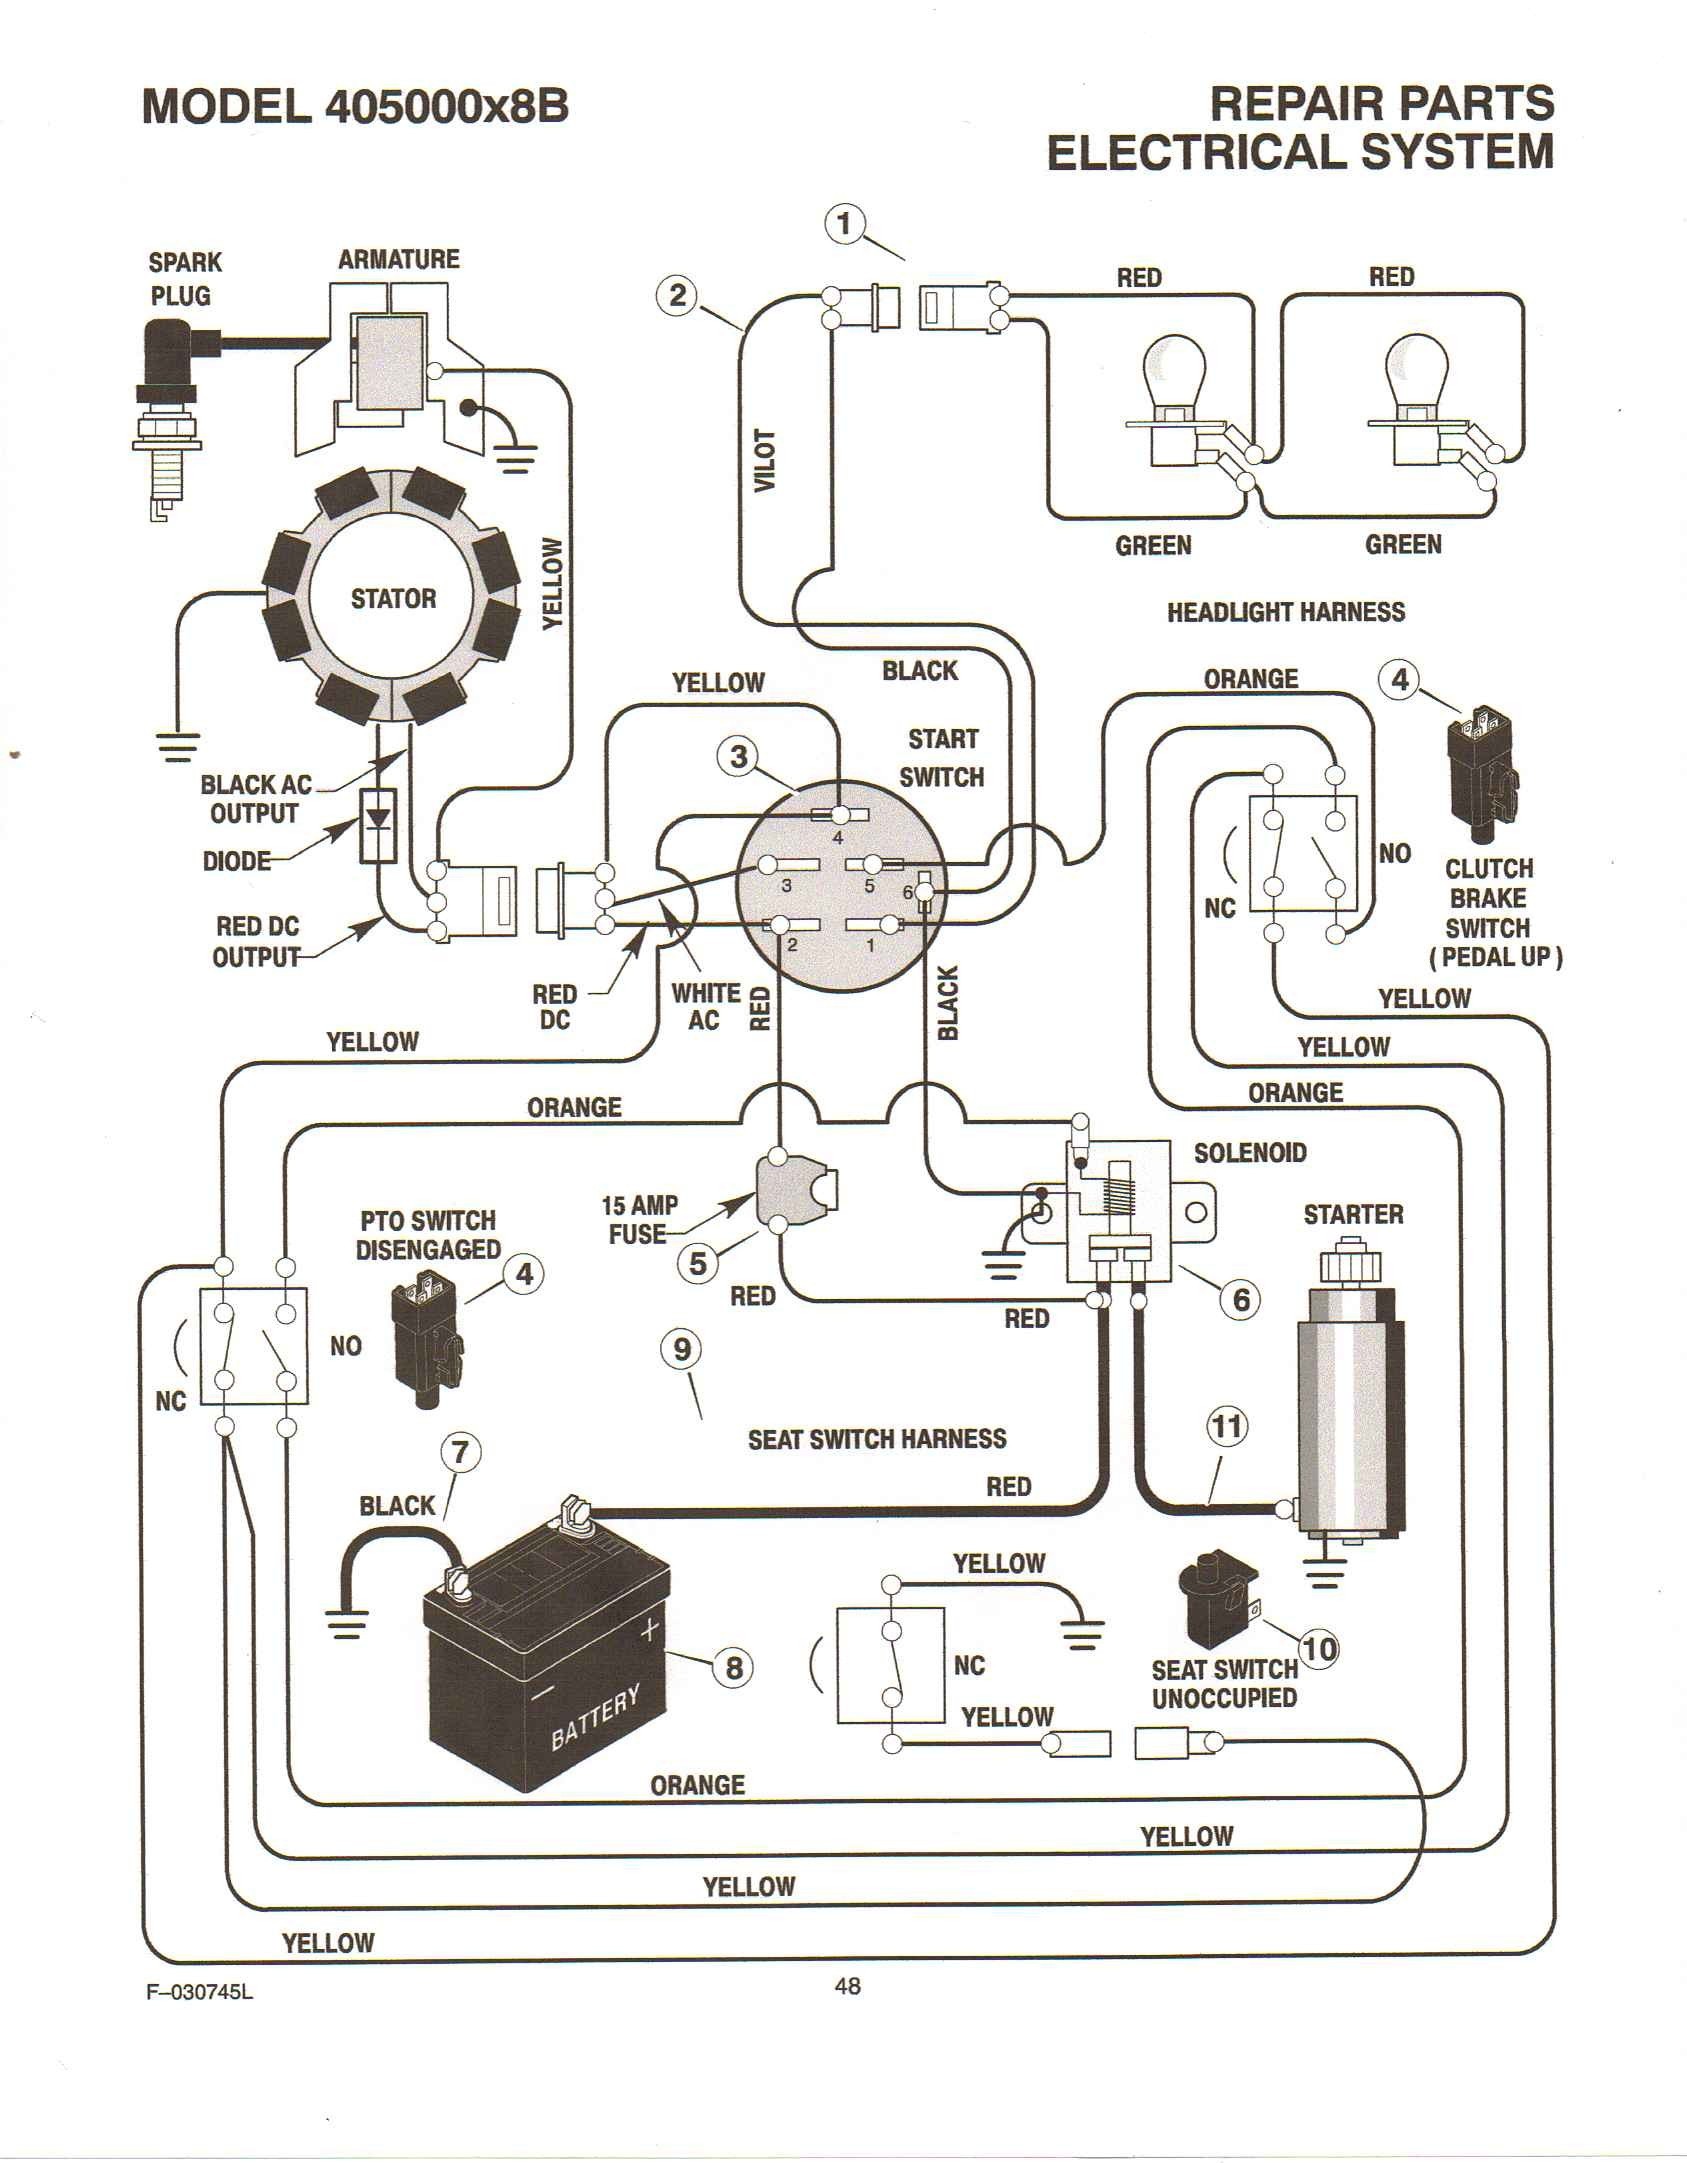 Wiring Diagram For Kohler Engine Briggs And Stratton Adorable 20 Hp